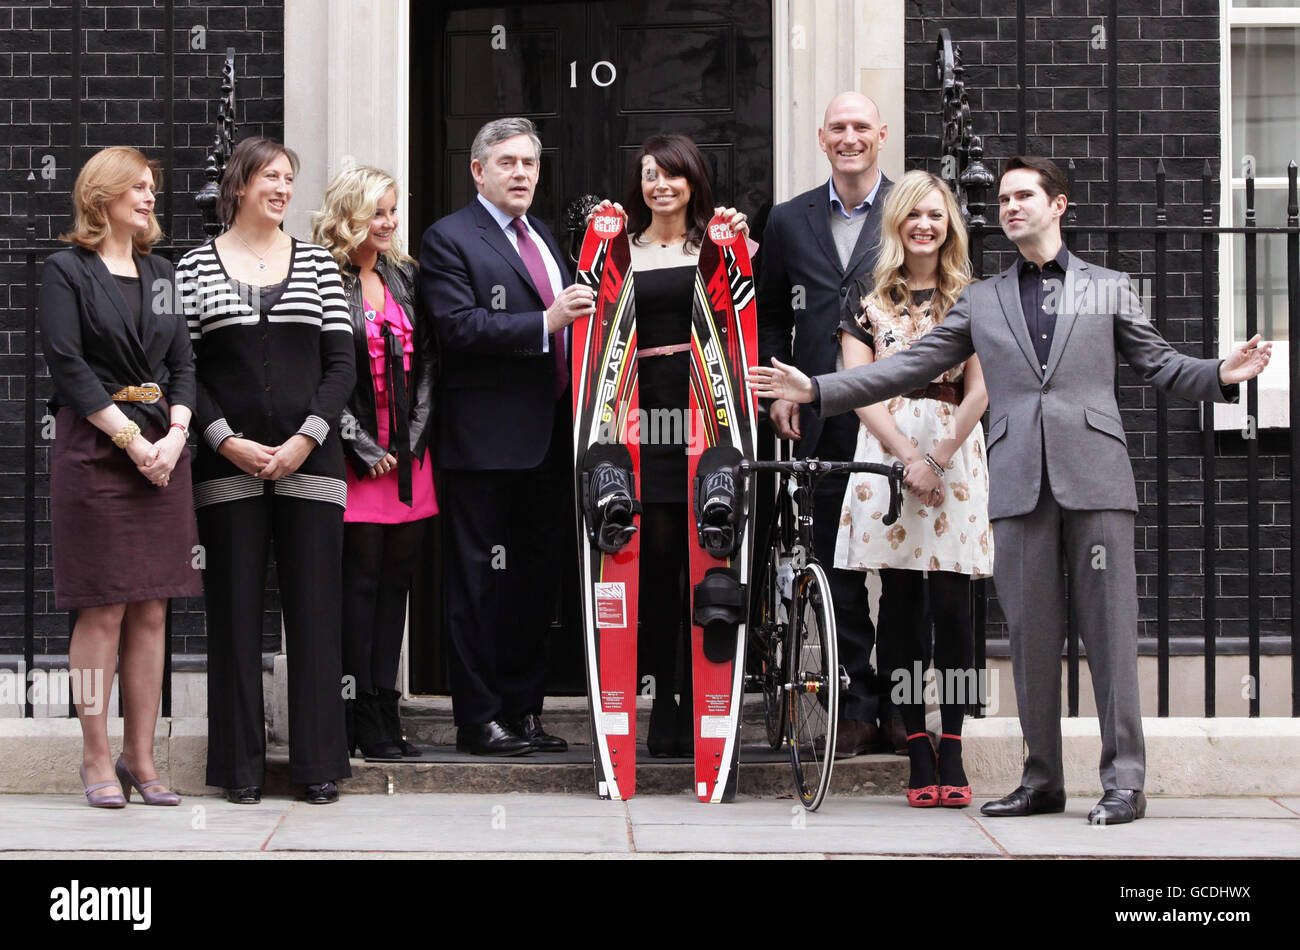 Prime Minister Gordon Brown and wife Sarah meet Sport Relief celebrity challengers (from left) Miranda Hart, Helen Skelton, Christine Bleakley, Lawrence Dallaglio, Fearne Cotton and Jimmy Carr, who have raised money as part of Sport Relief, outside No 10 Downing Street in central London. Stock Photo